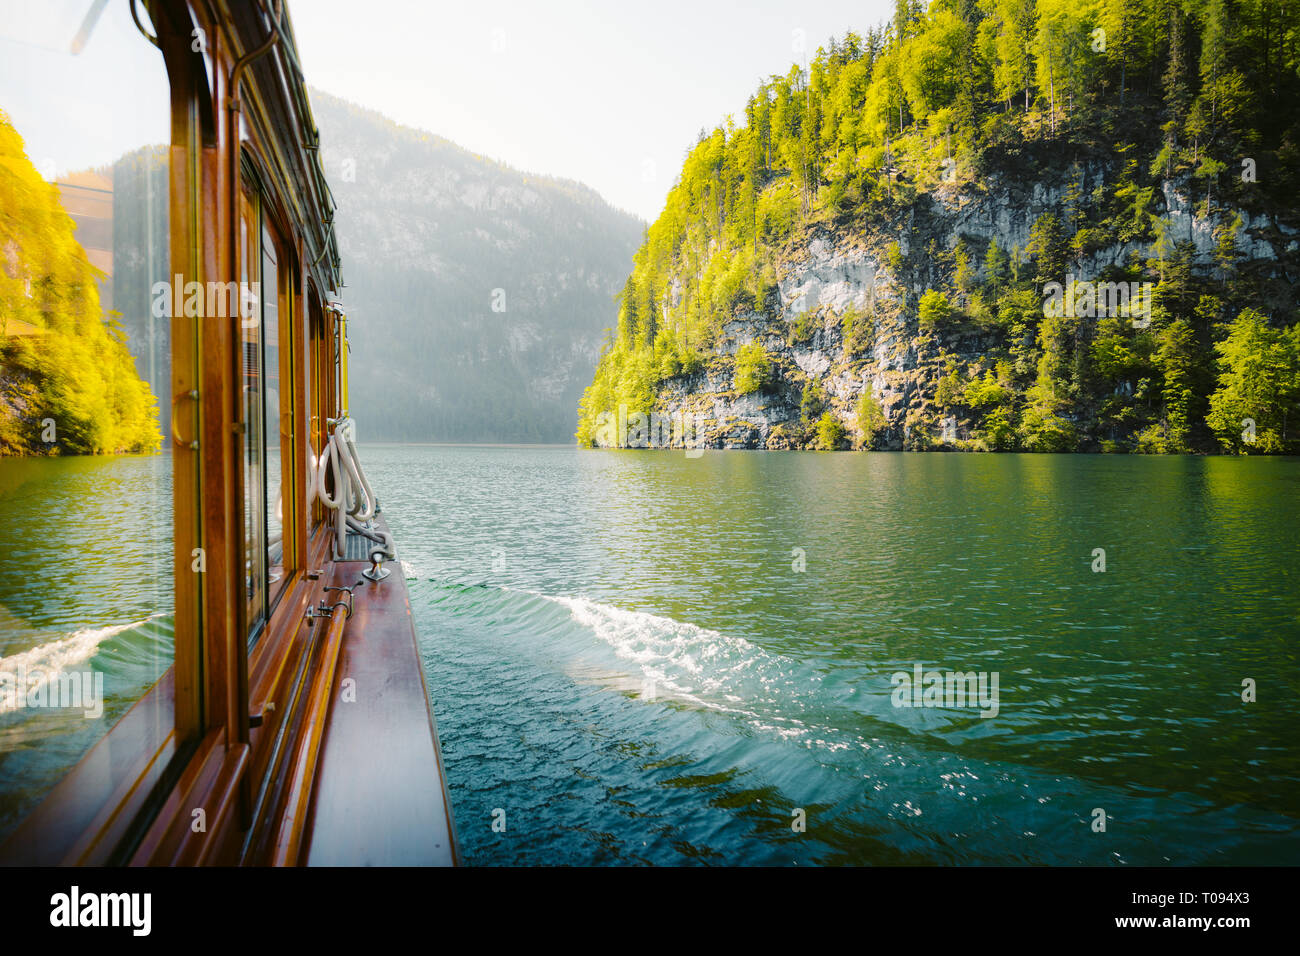 Traditional passenger boat gliding on Lake Konigssee with Watzmann mountain in the background on a beautiful sunny day in summer, Berchtesgadener Land Stock Photo